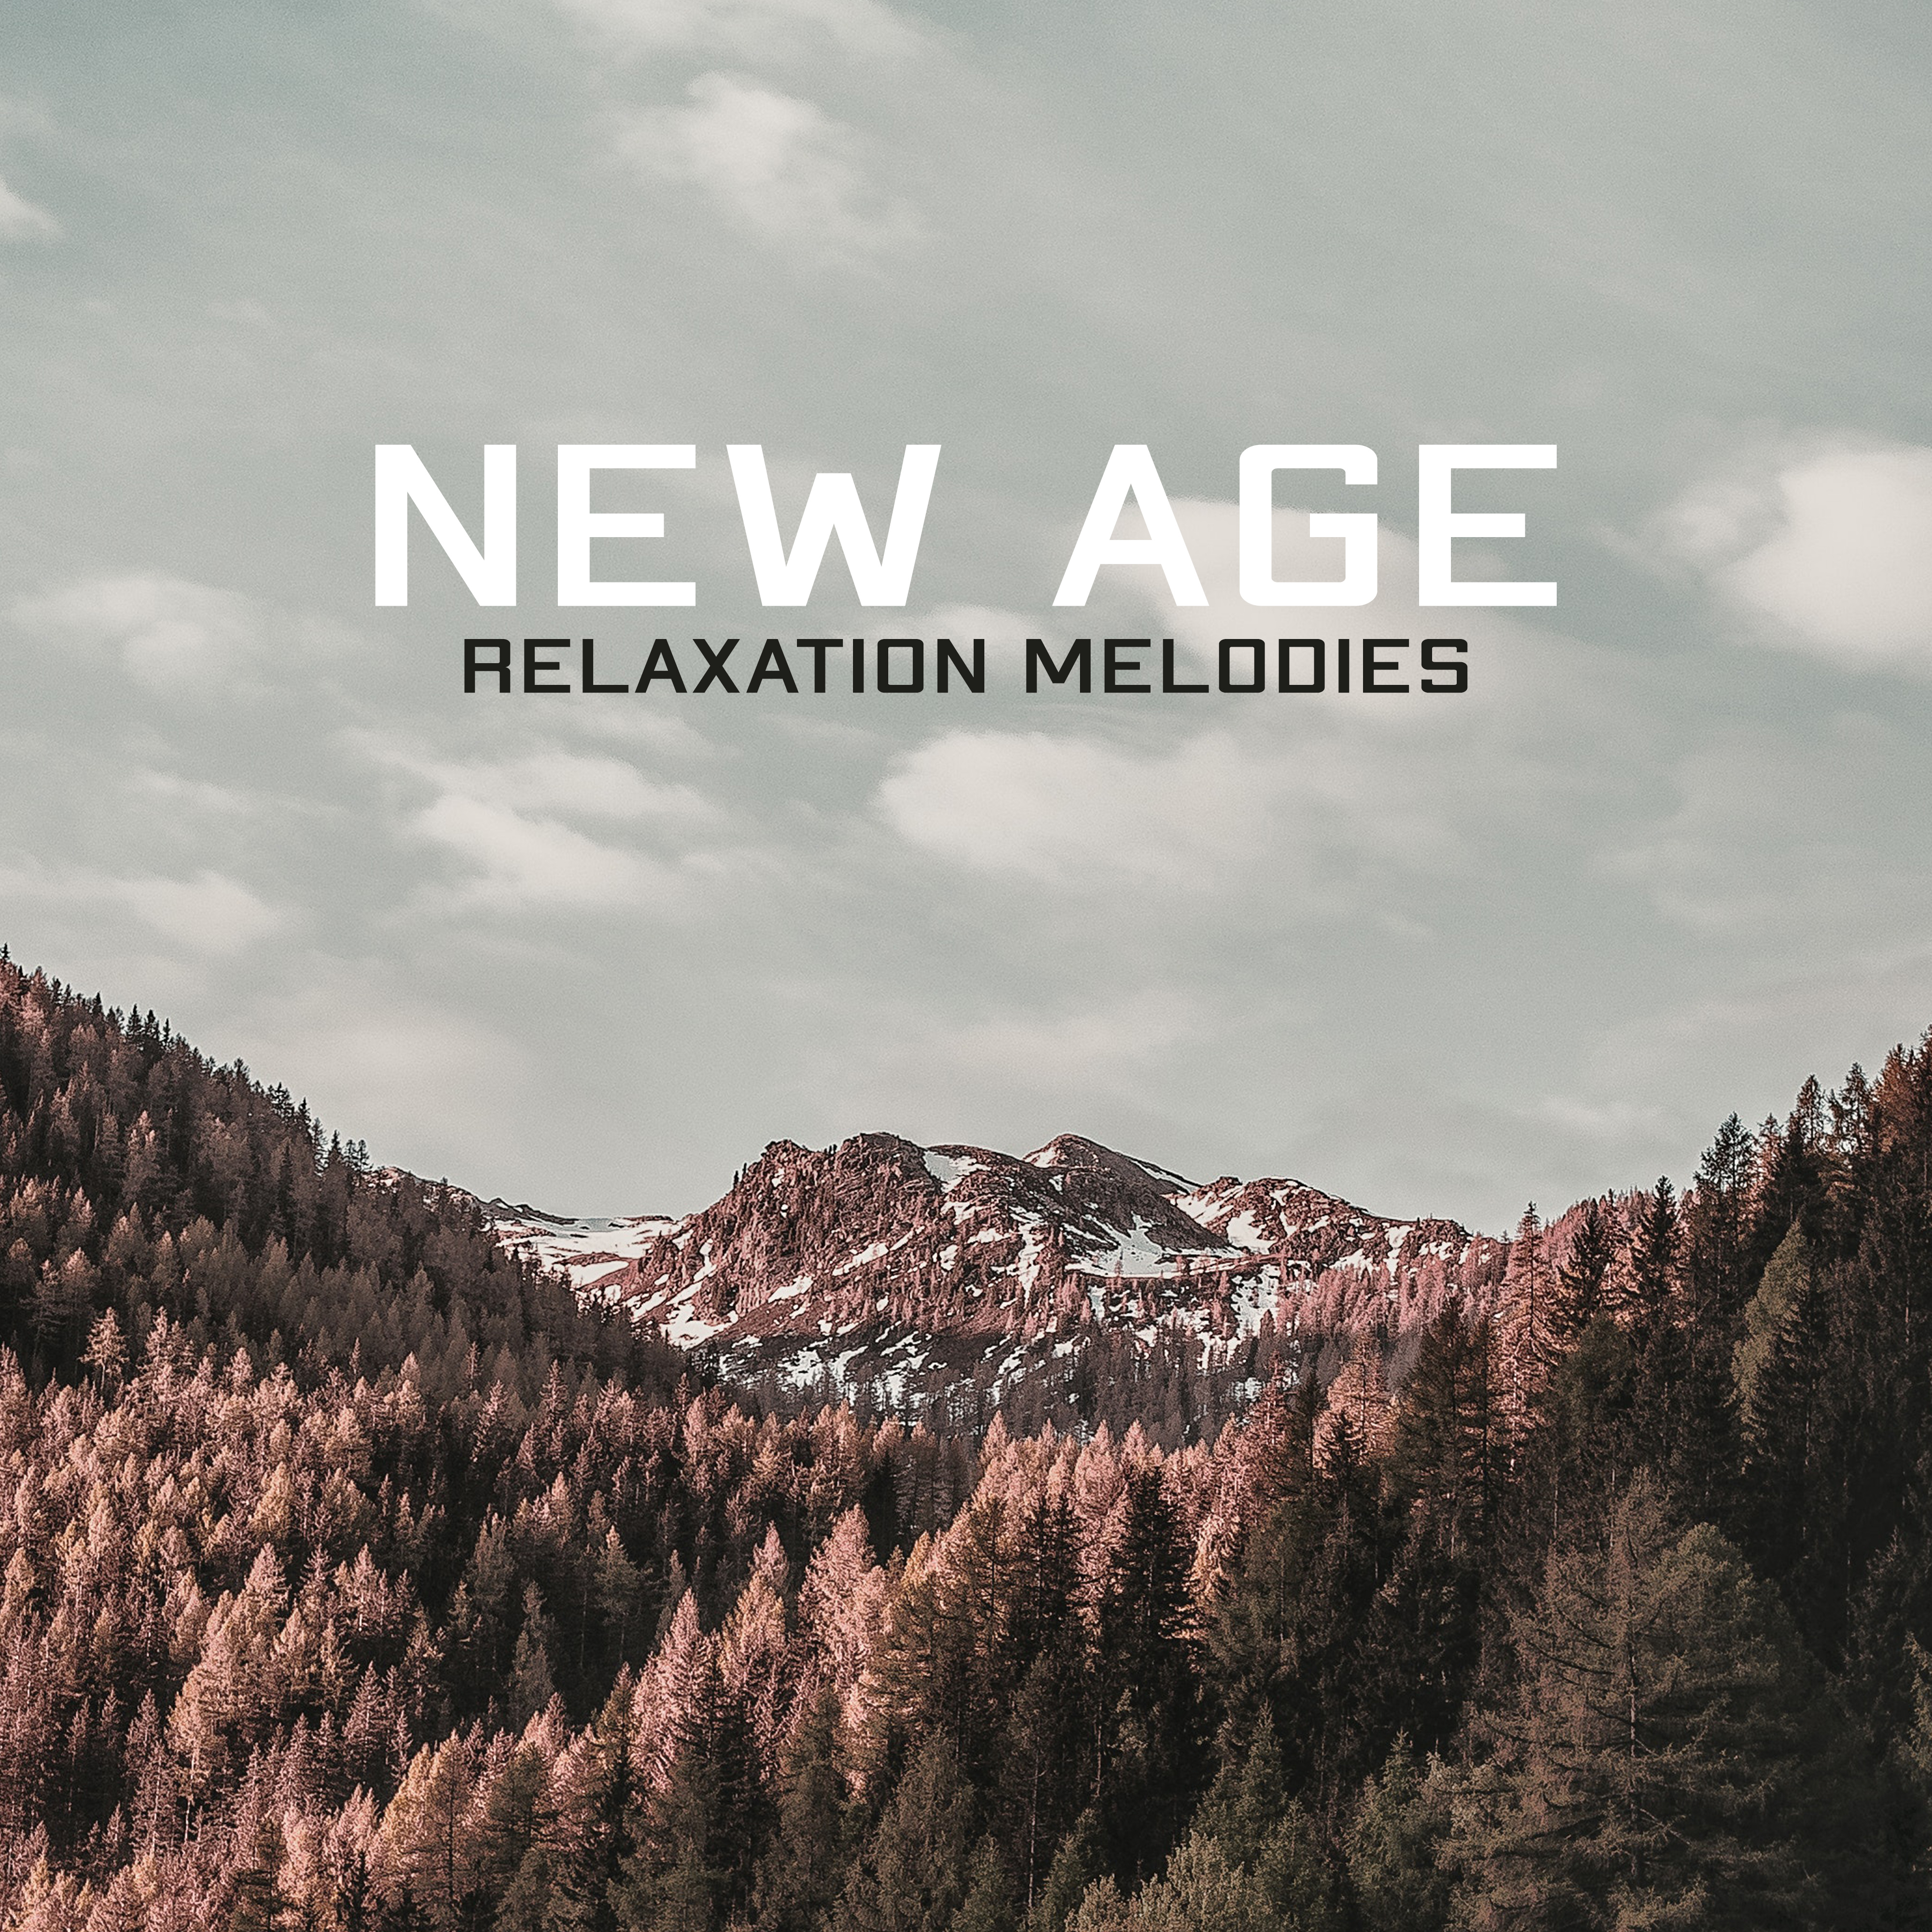 New Age Relaxation Melodies